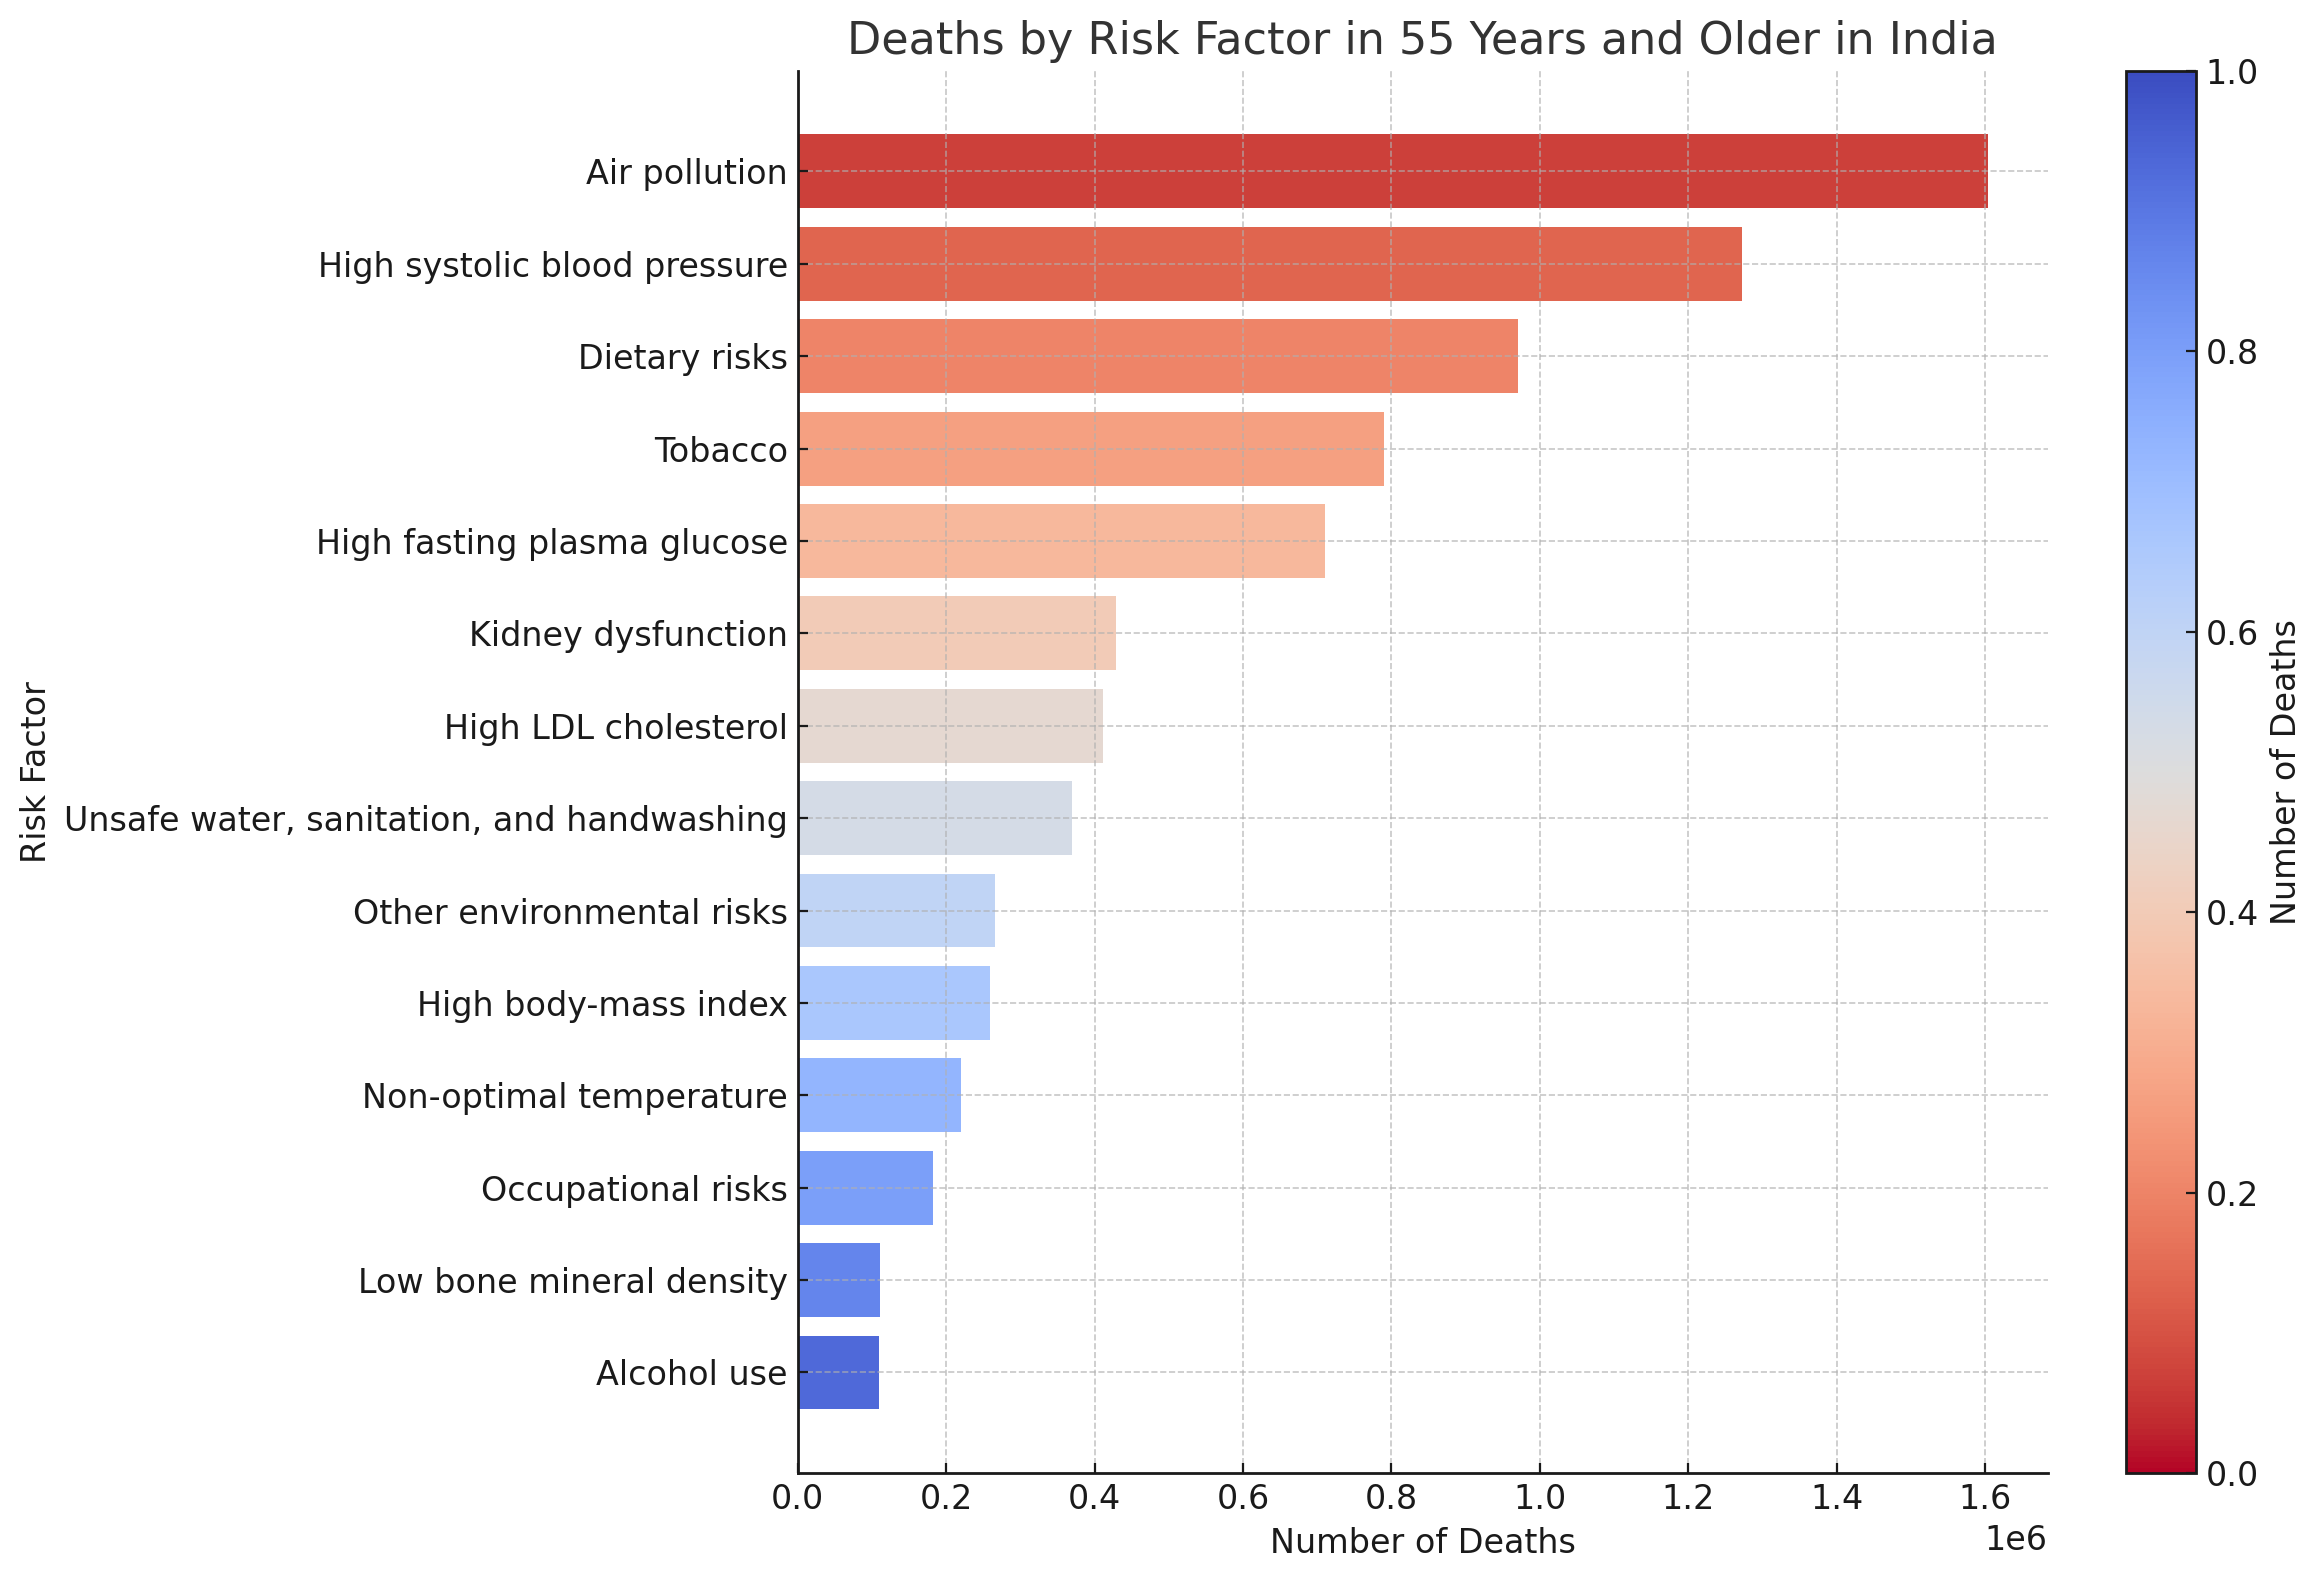 Thriving After 55: Staying Healthy and Preventing Major Health Risks - Based on the GBD 2021 Data